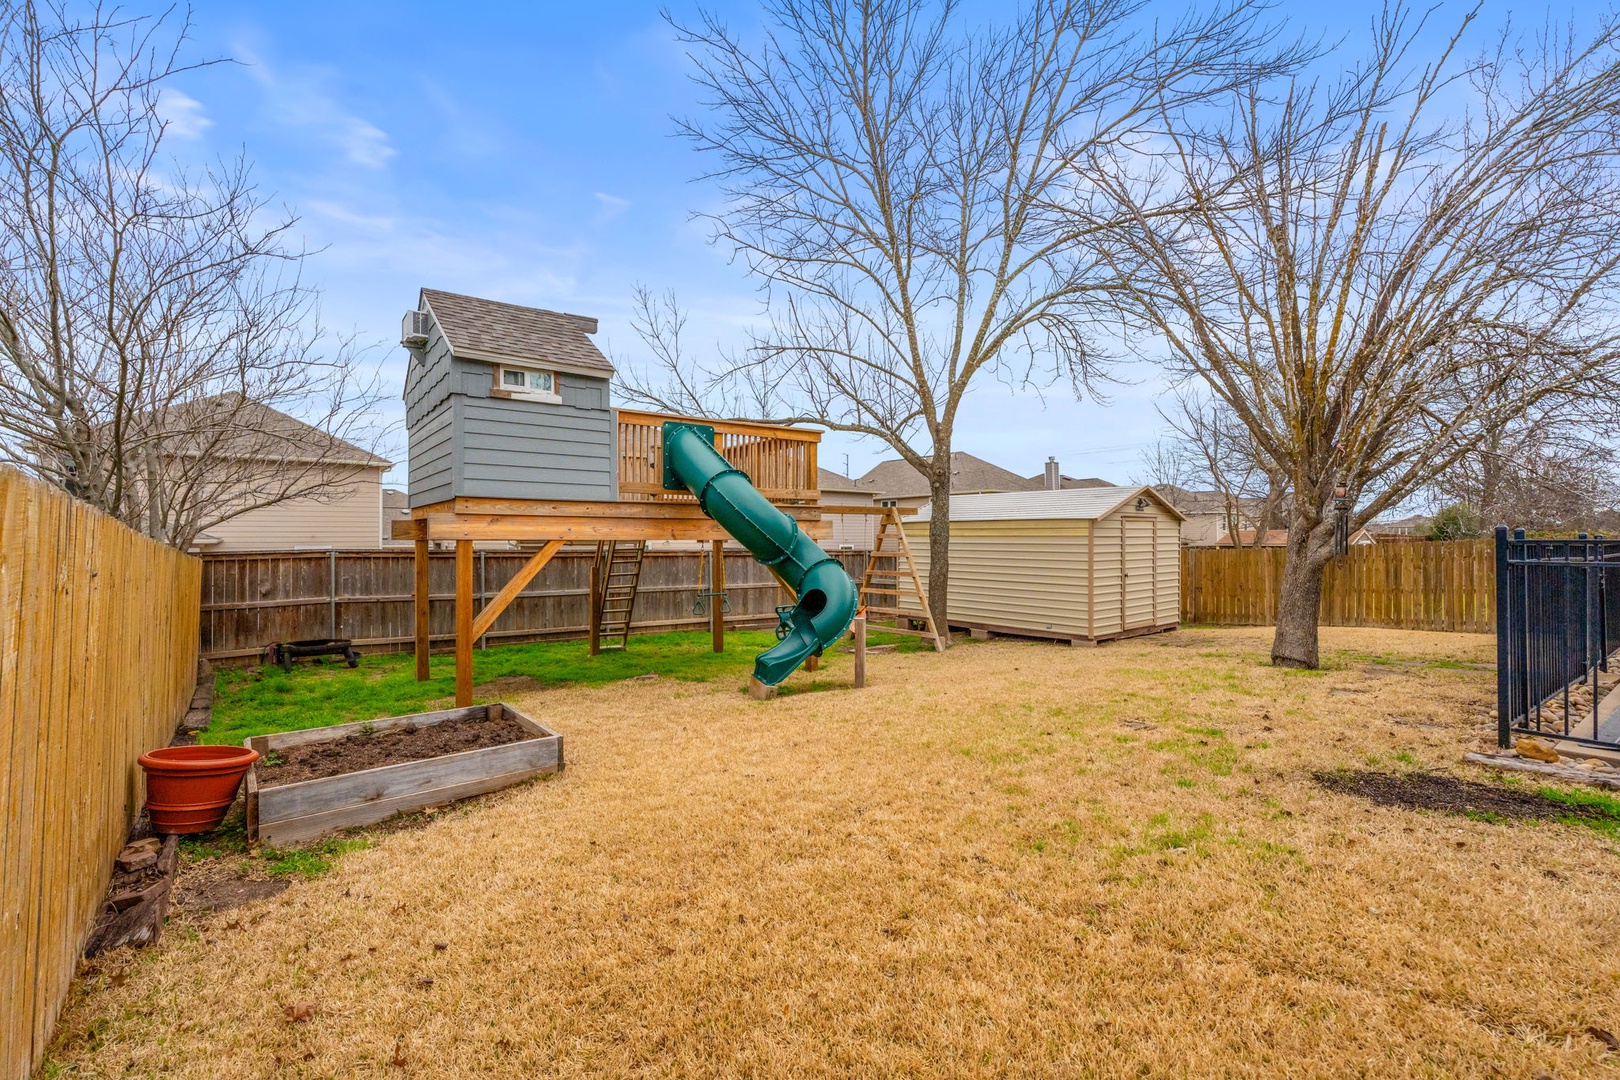 The backyard playground equipment/clubhouse is sure to be a hit with littles!